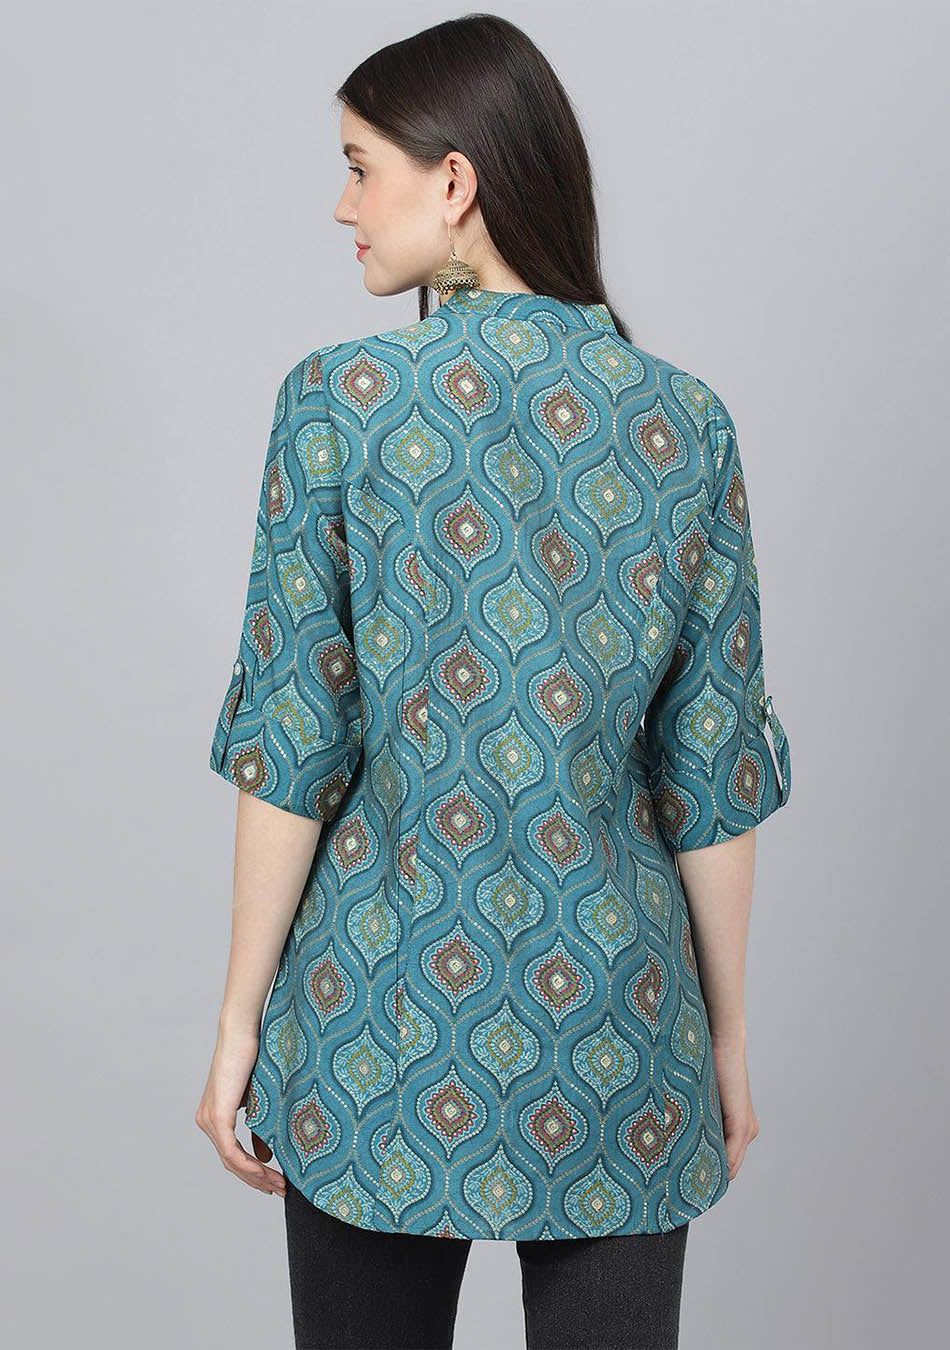 Teal Blue Motif Printed Modal A-Line Shirts Style Top